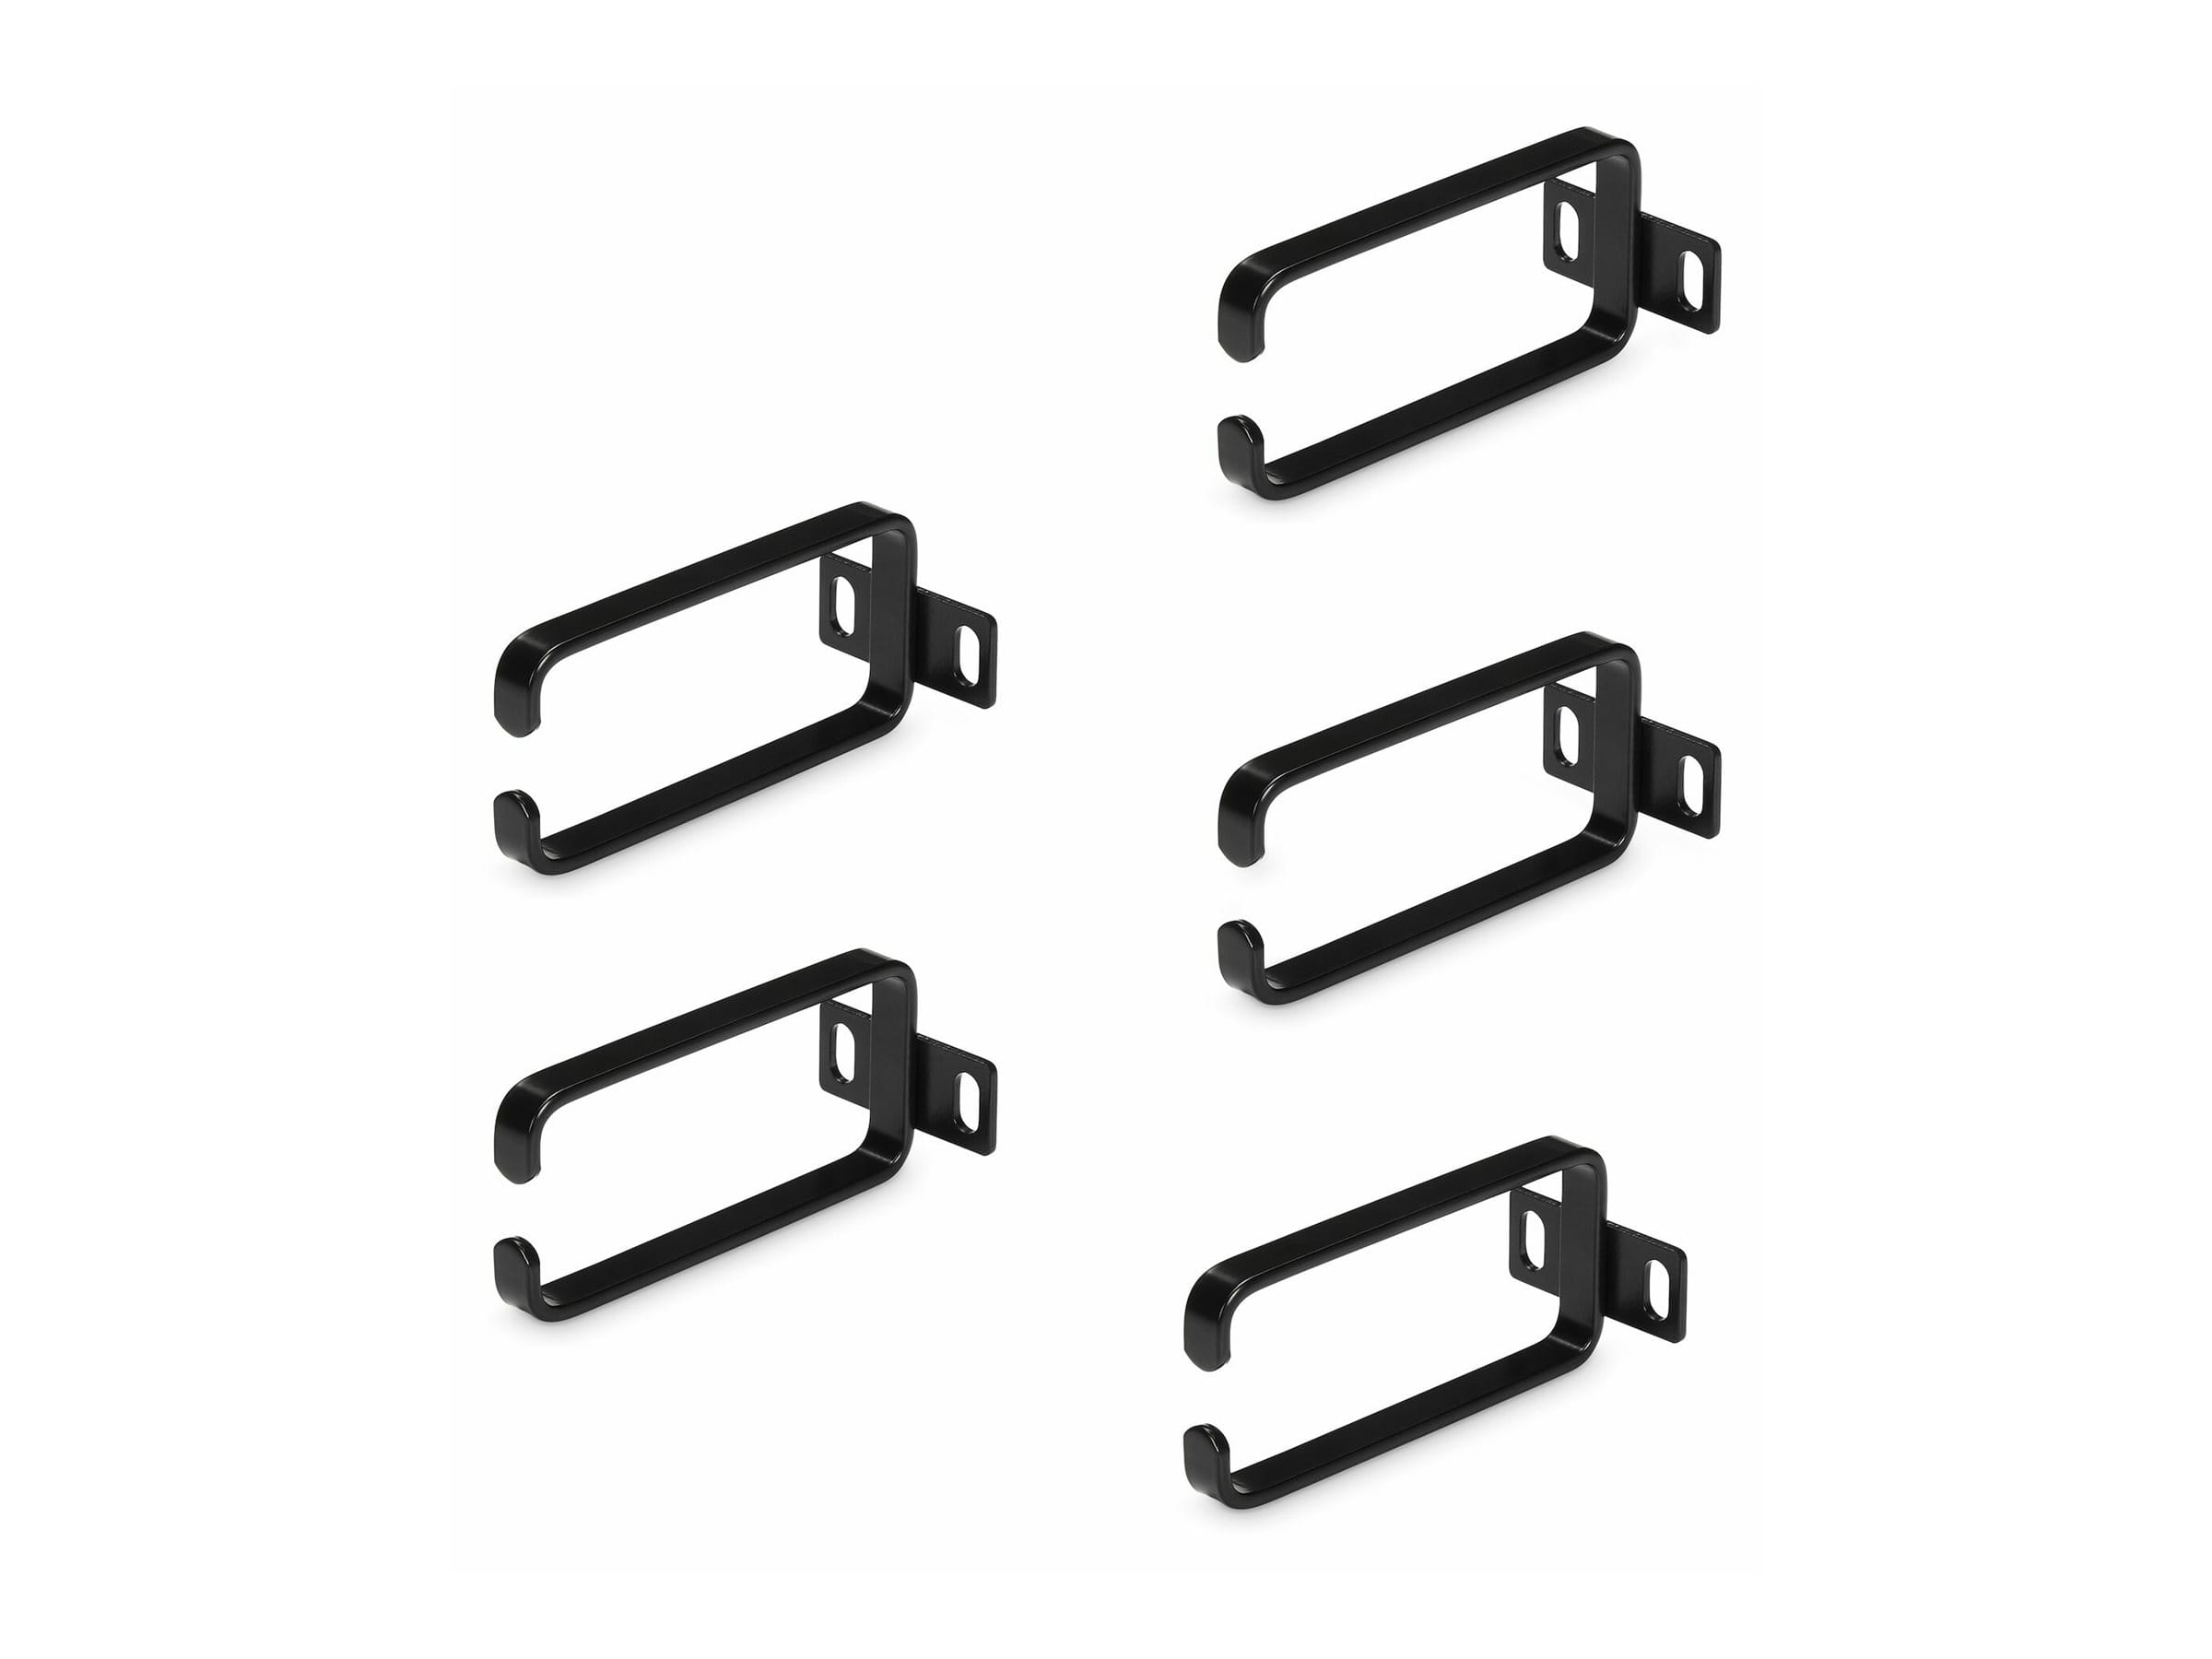 StarTech.com 5-Pack 1U Vertical Cable Management D-Ring Hooks, Cable Manager For 19" Server Racks/Cabinets, Network Rack Wire Organizers, Cable Guide Rings - Kabelmanagementring (vertikal)